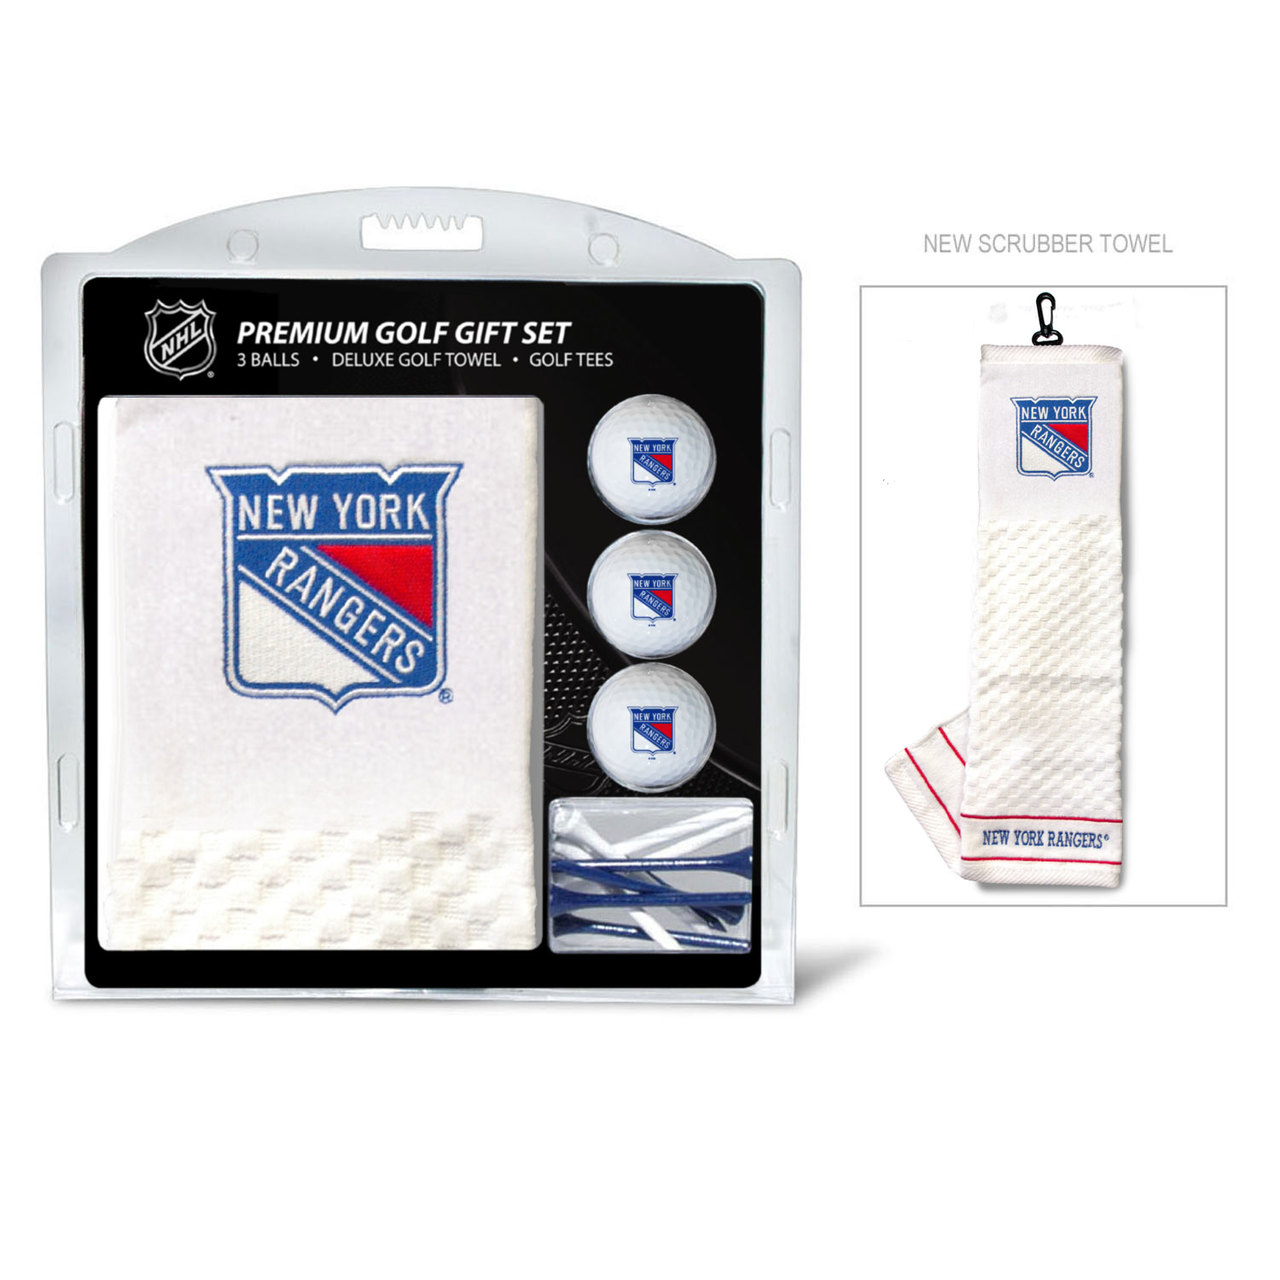 New York Rangers Golf Gift Set with Embroidered Towel - Special Order